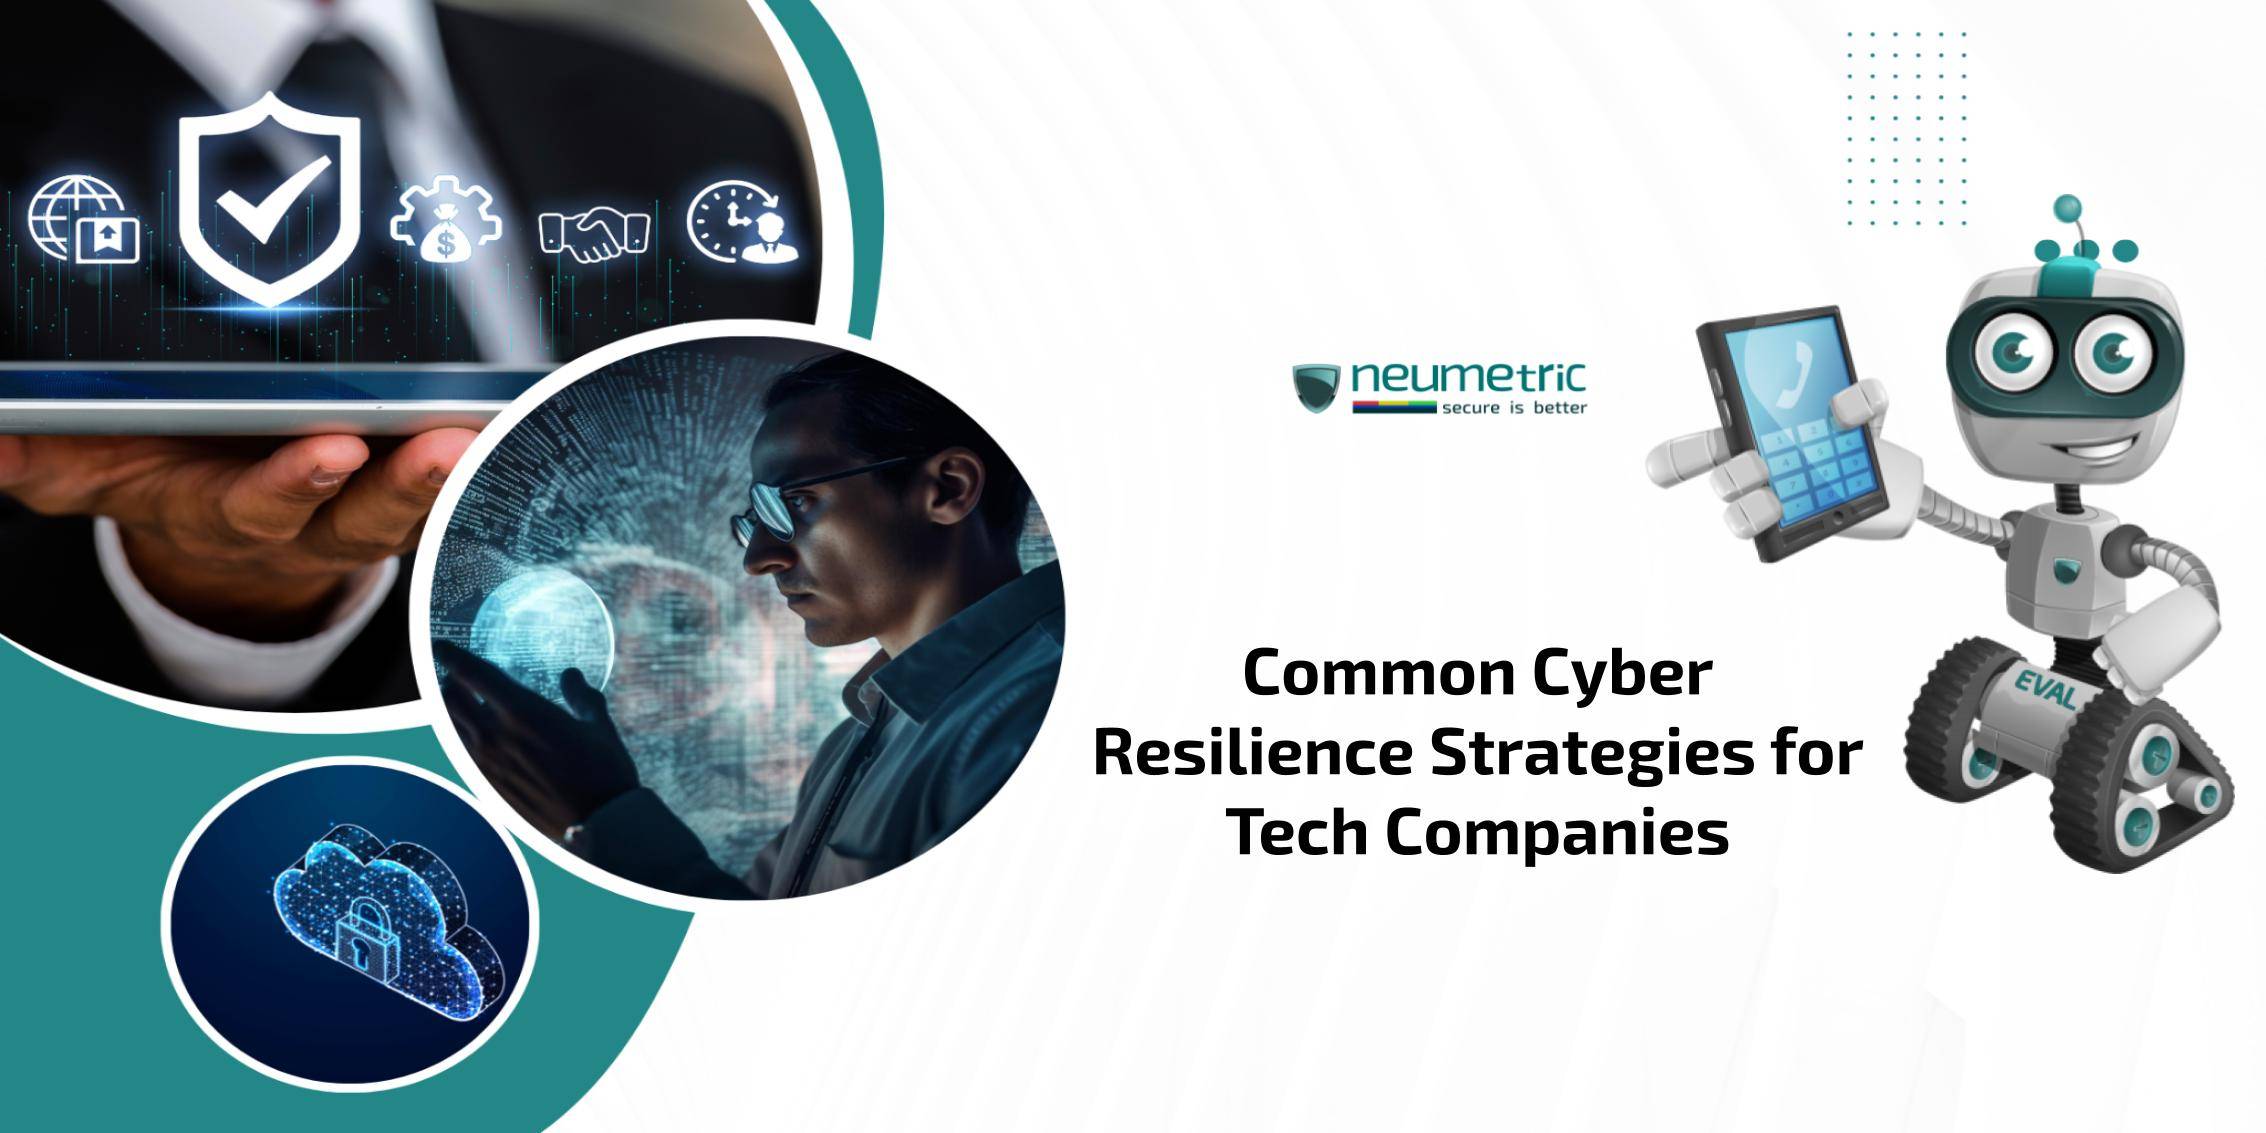 Cyber resilience strategies for tech companies